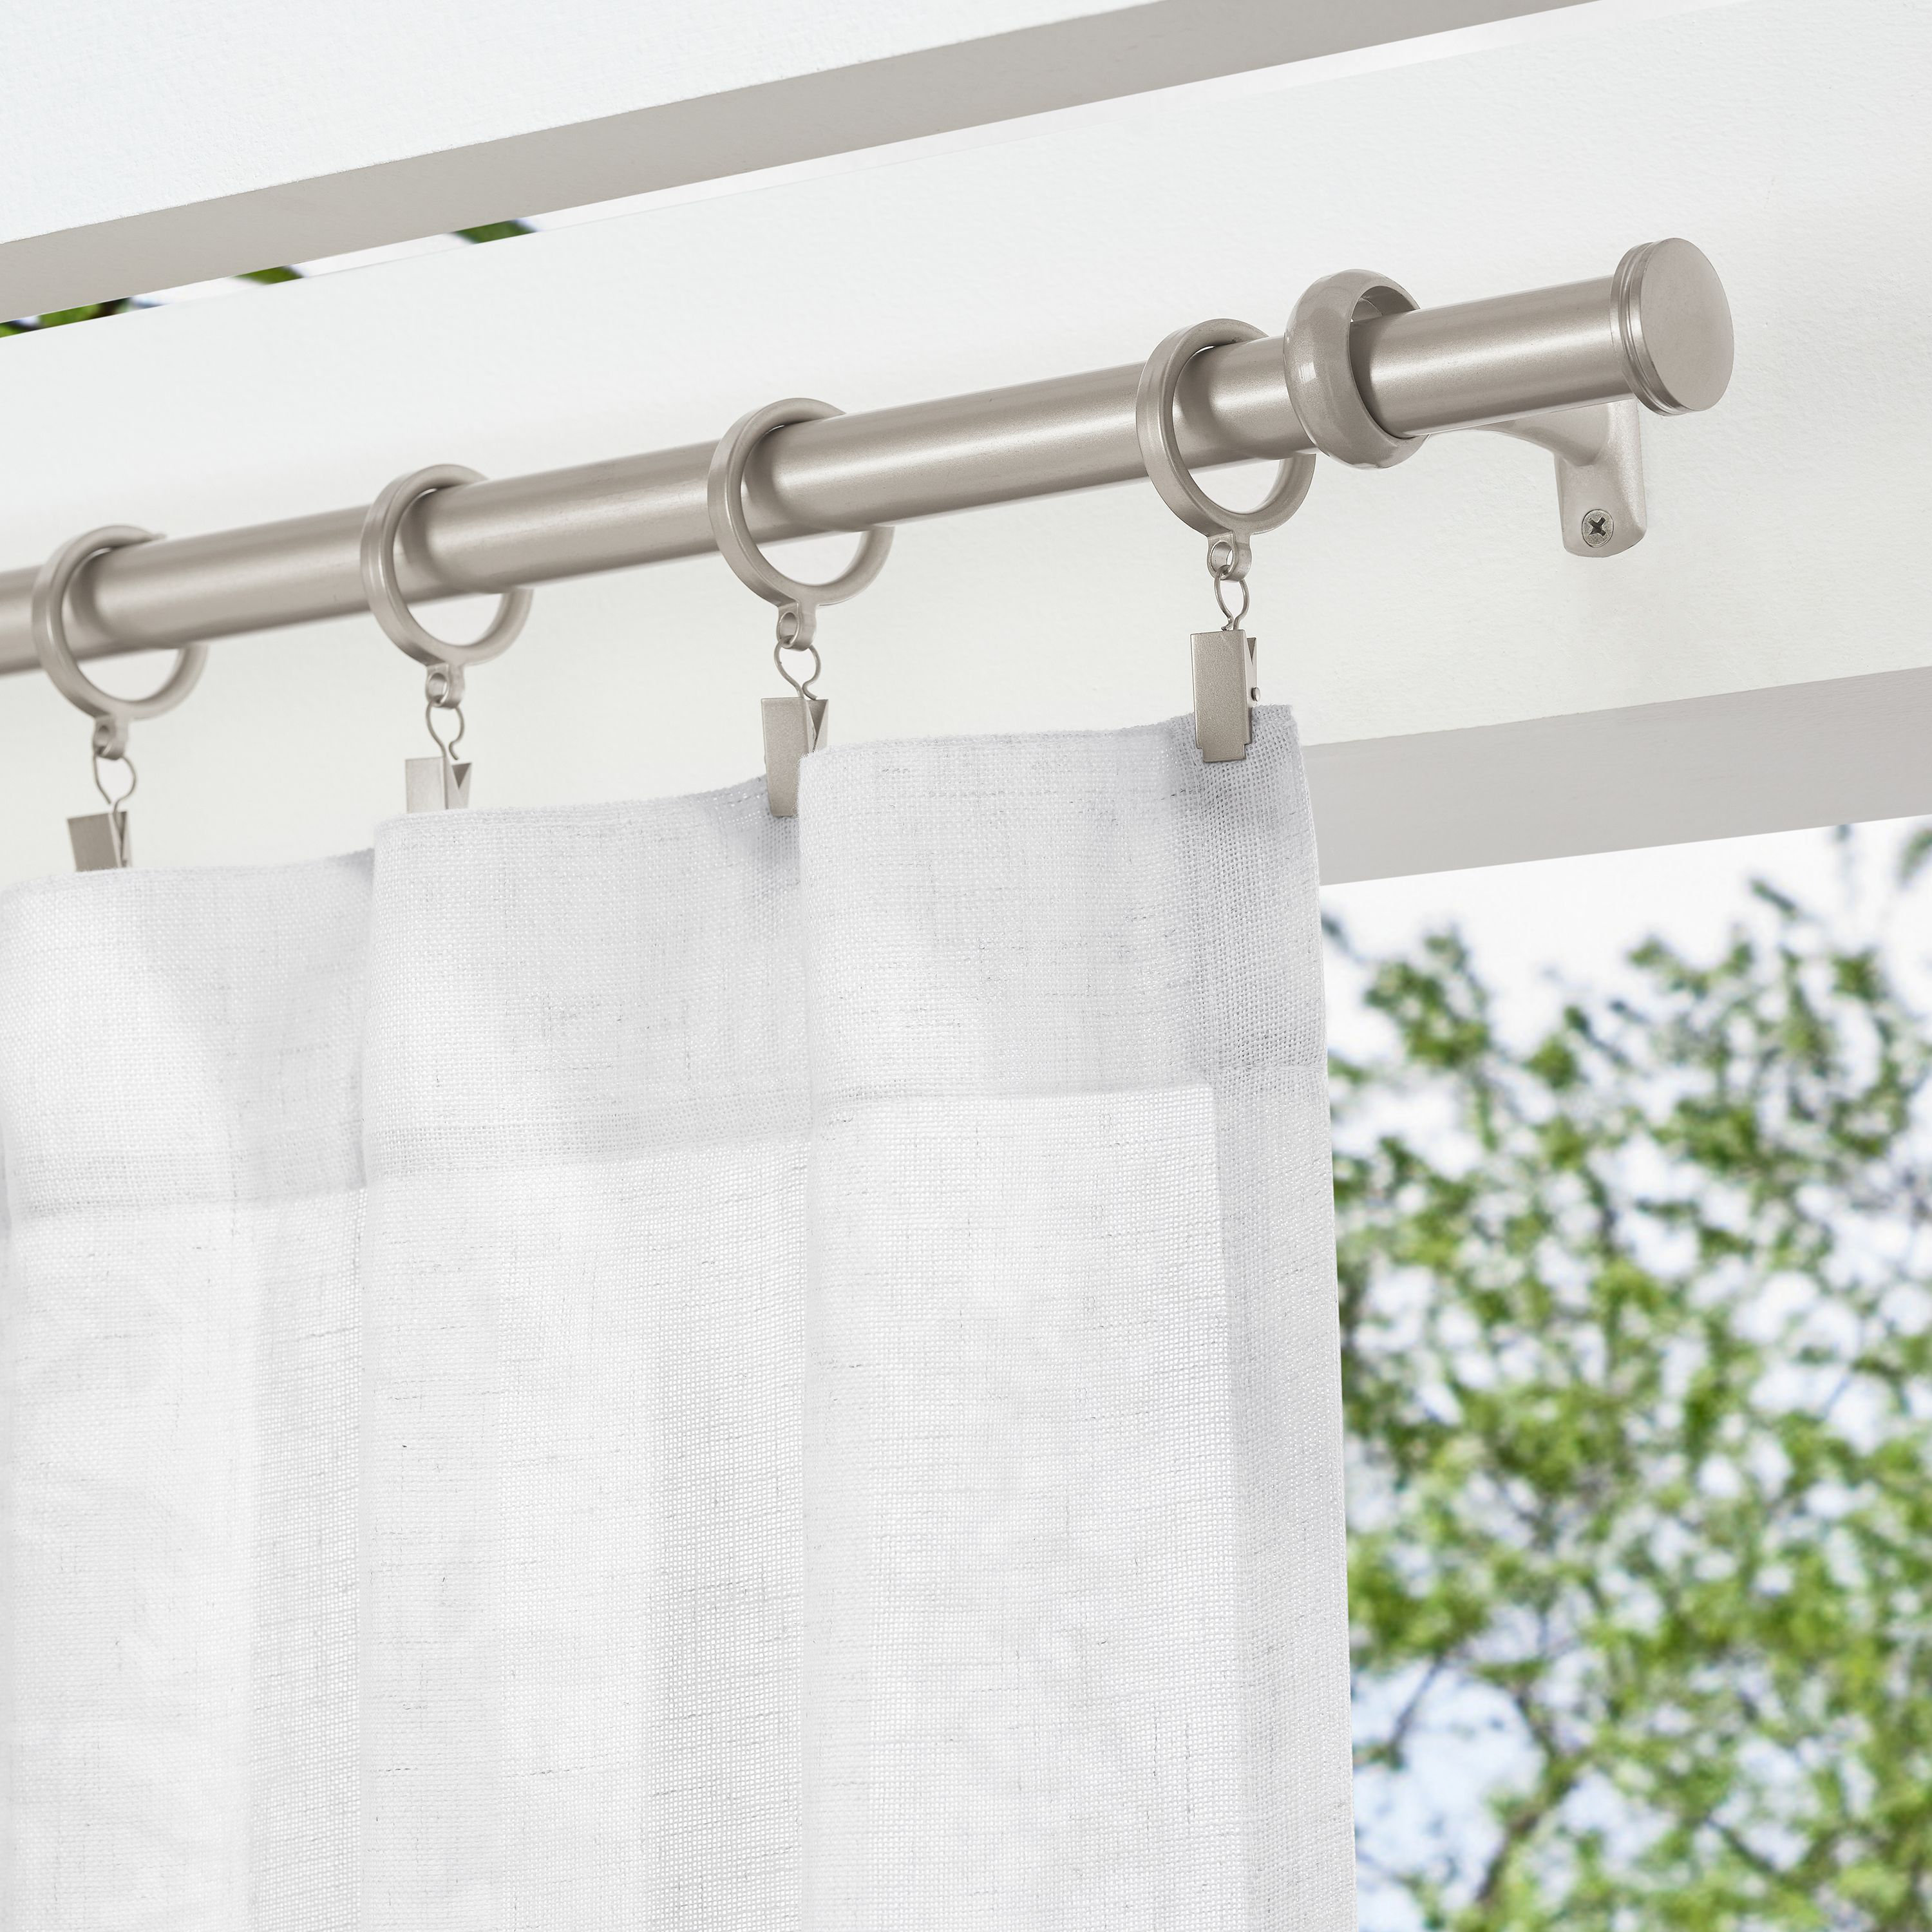 Mode Outdoor Collection 1 1/8 Diameter Curtain Rod Set with End Cap Finials and Steel Wall Mounted Adjustable Curtain Rod, Fits 72” to 144” Windows